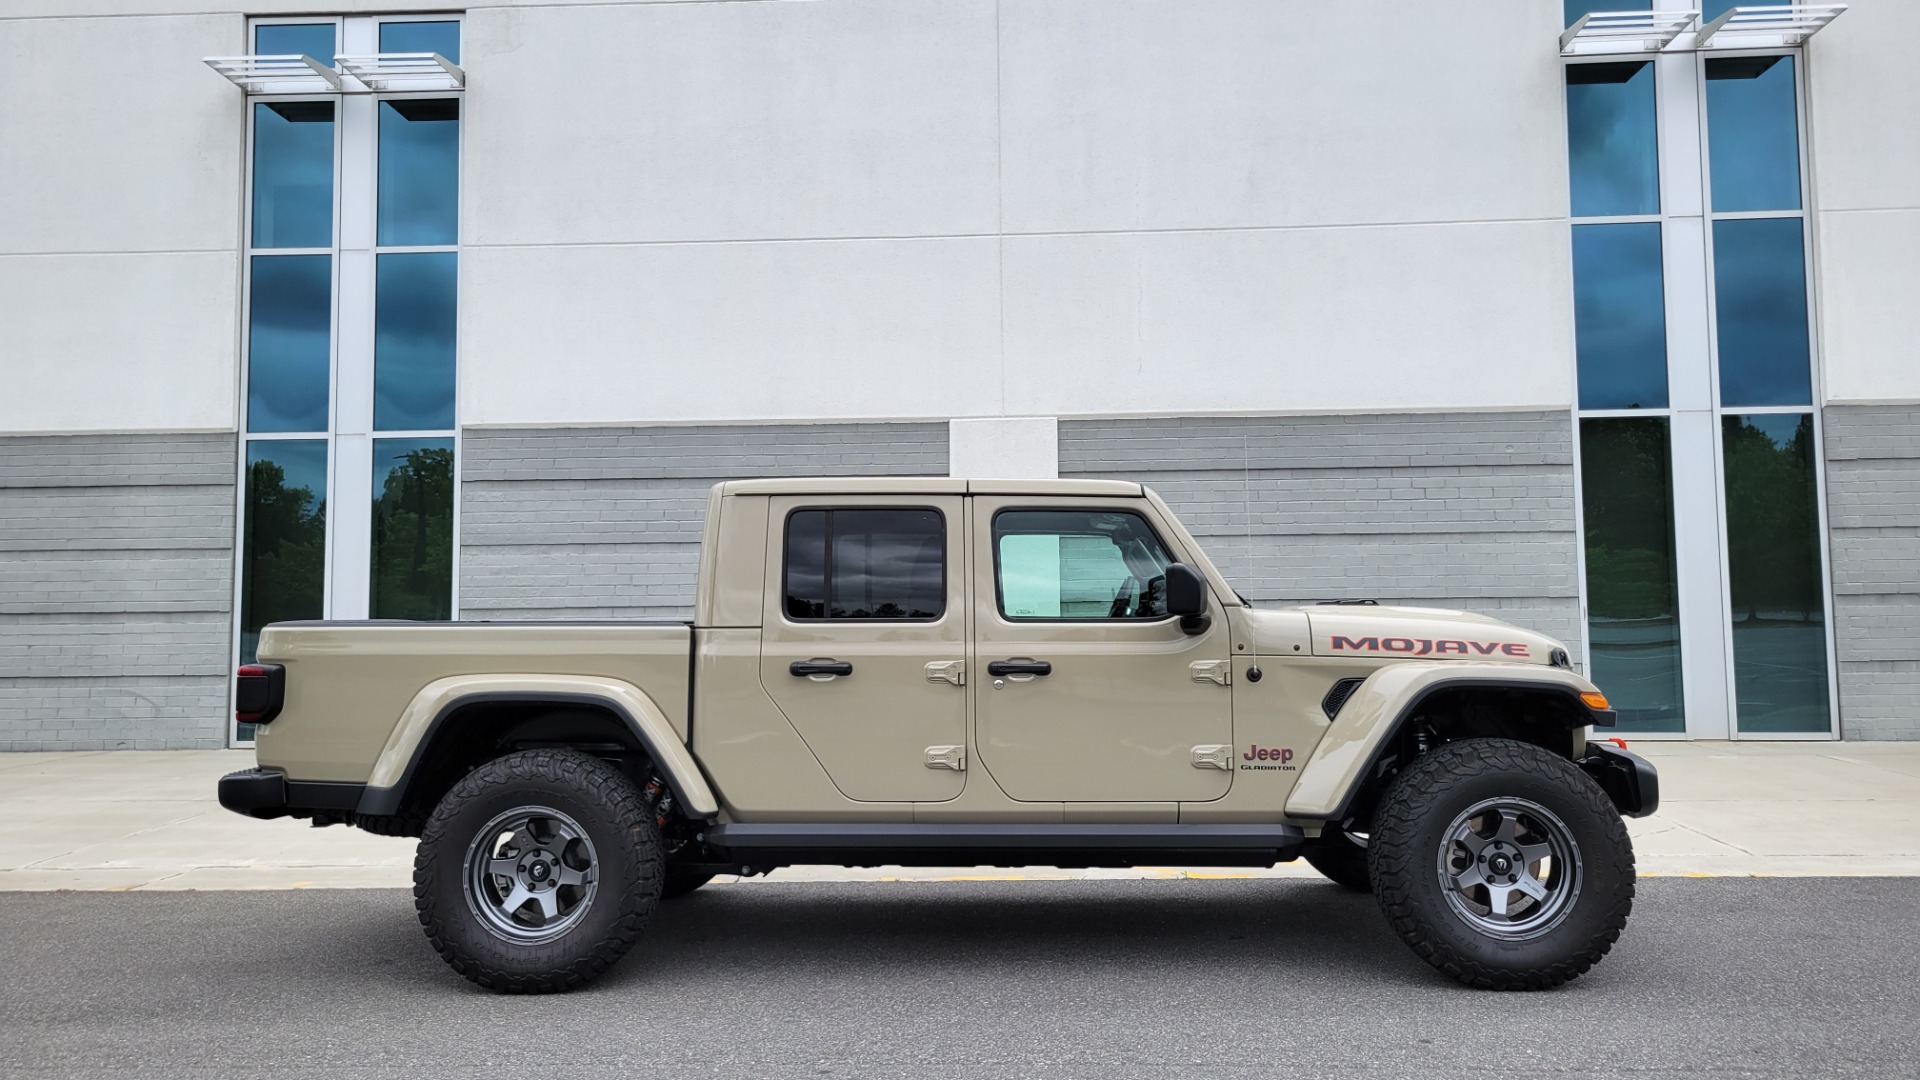 Used 2020 Jeep GLADIATOR MOJAVE 4X4 / 3.6L / AUTO / NAV / COLOR HARD-TOP / ALPINE / REARVIEW for sale $58,995 at Formula Imports in Charlotte NC 28227 10